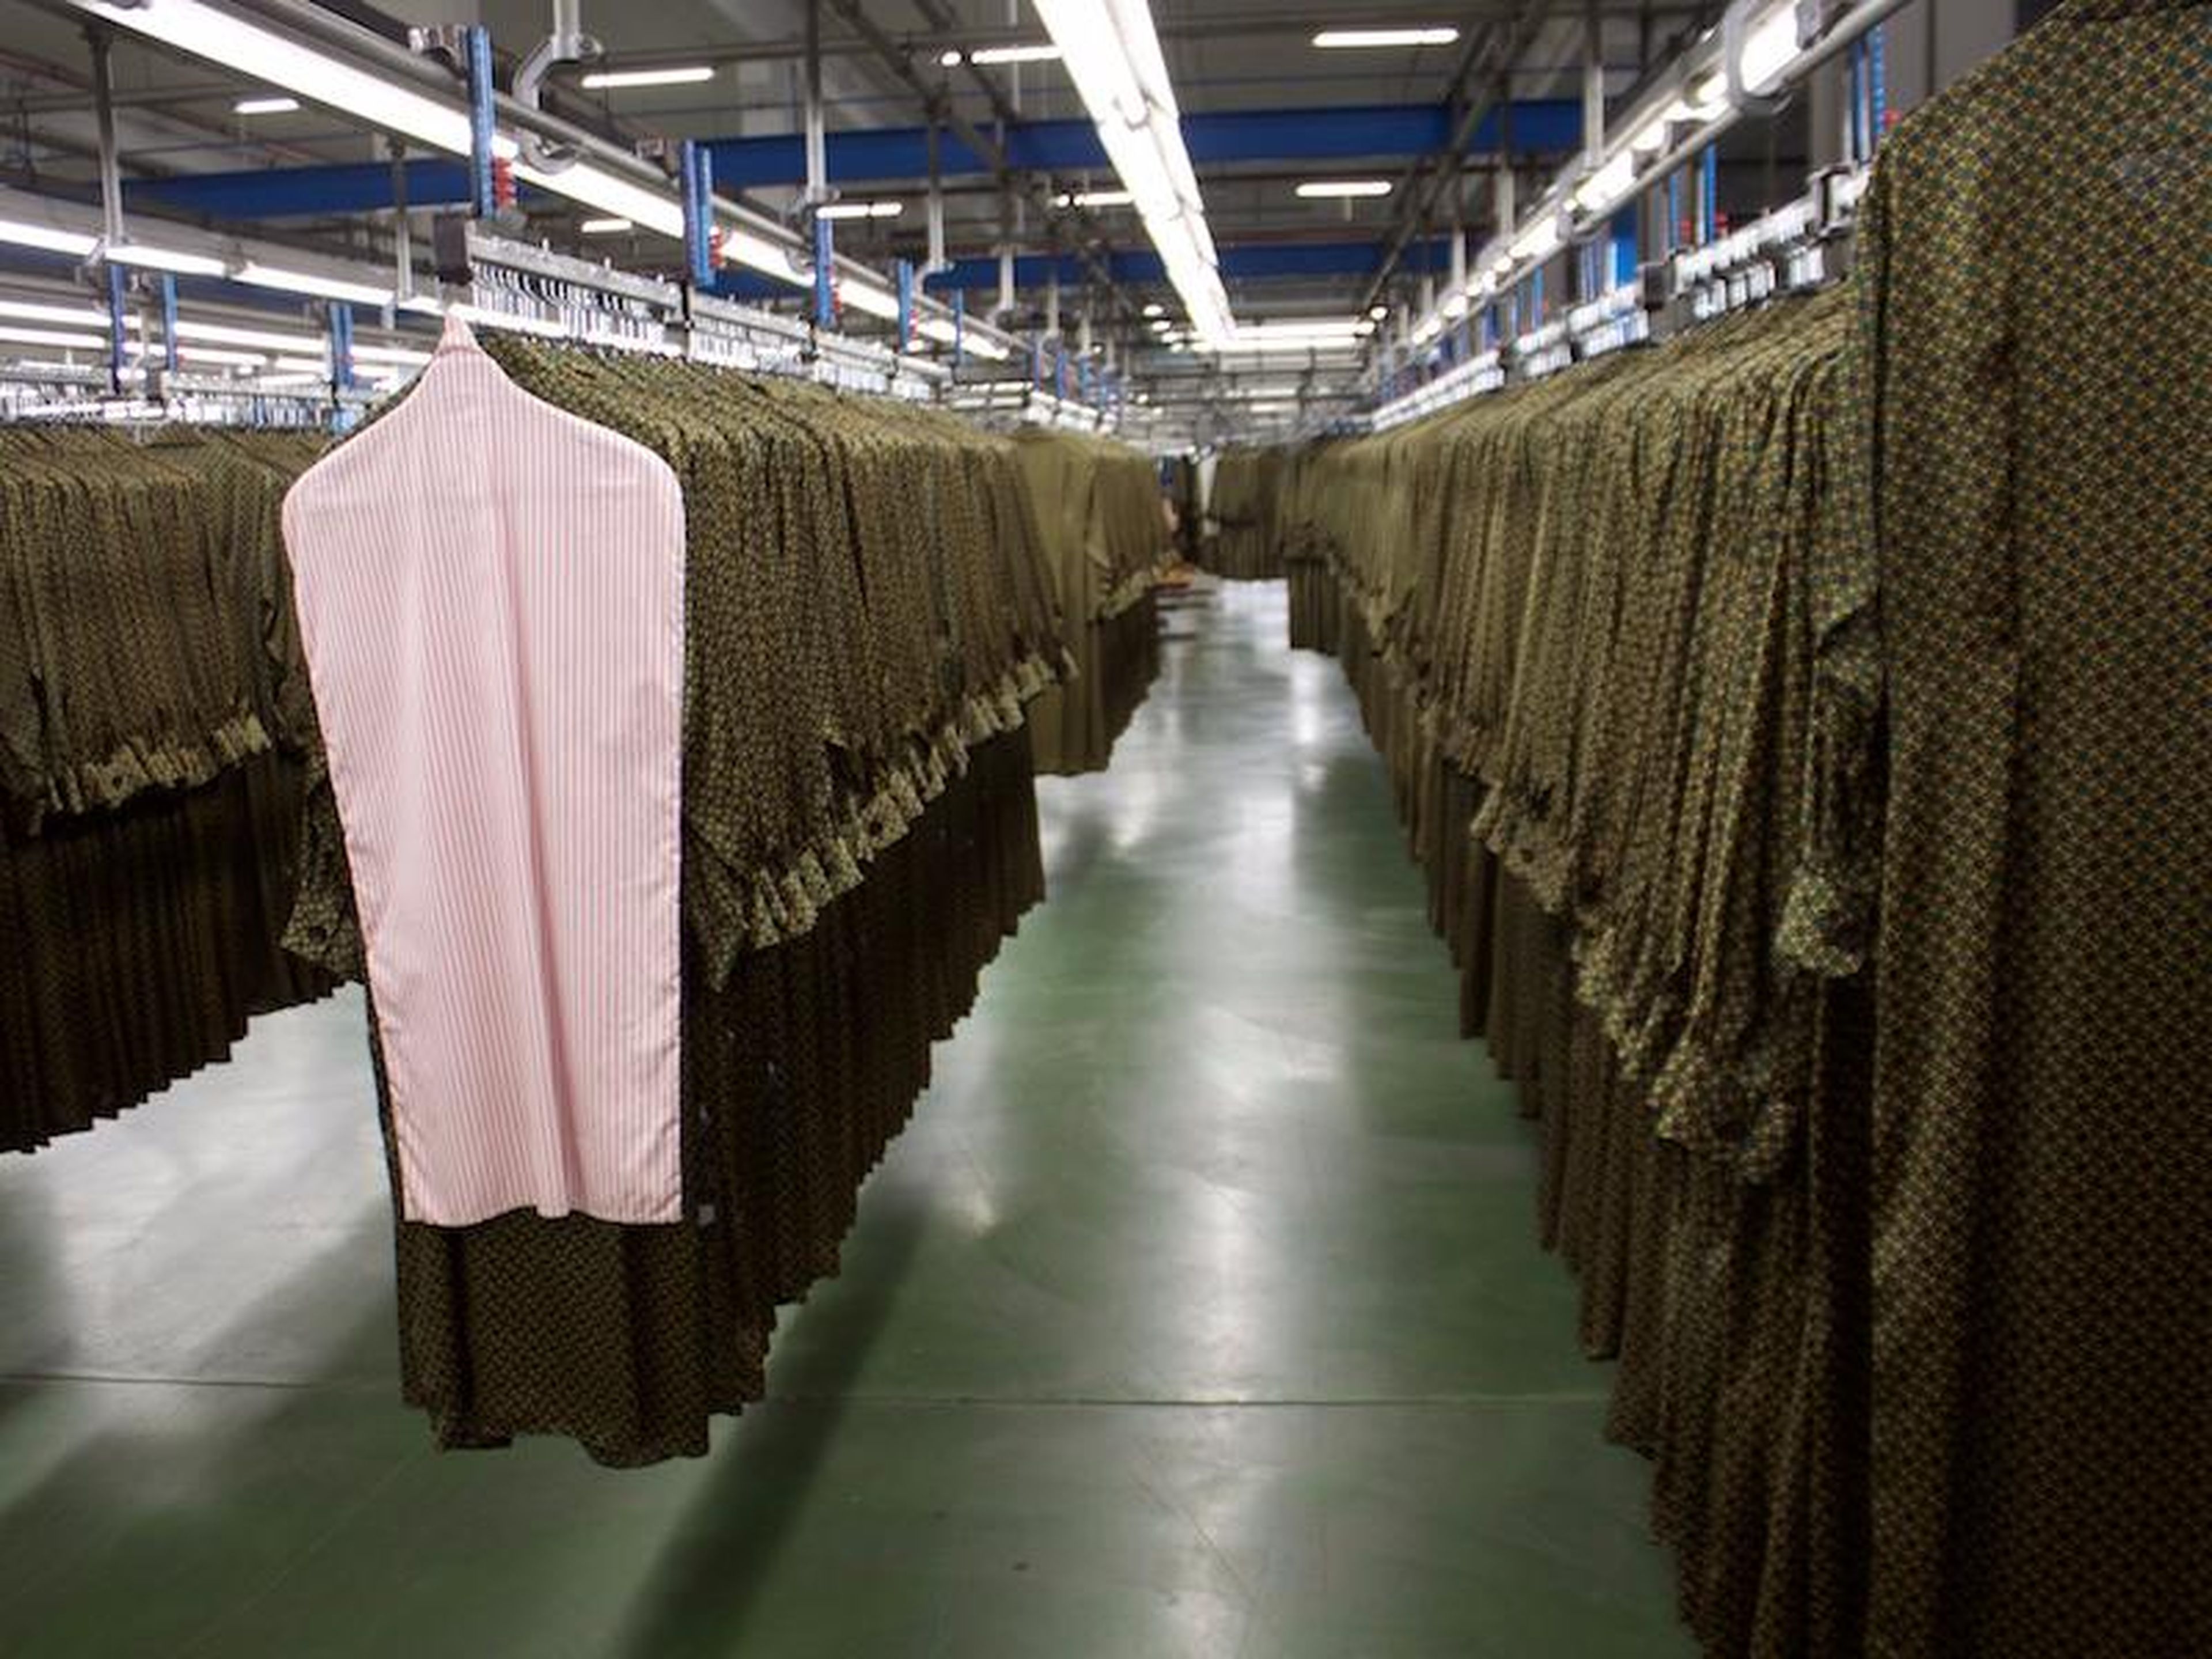 Once the item is sewn together, it returns to Zara's headquarters.